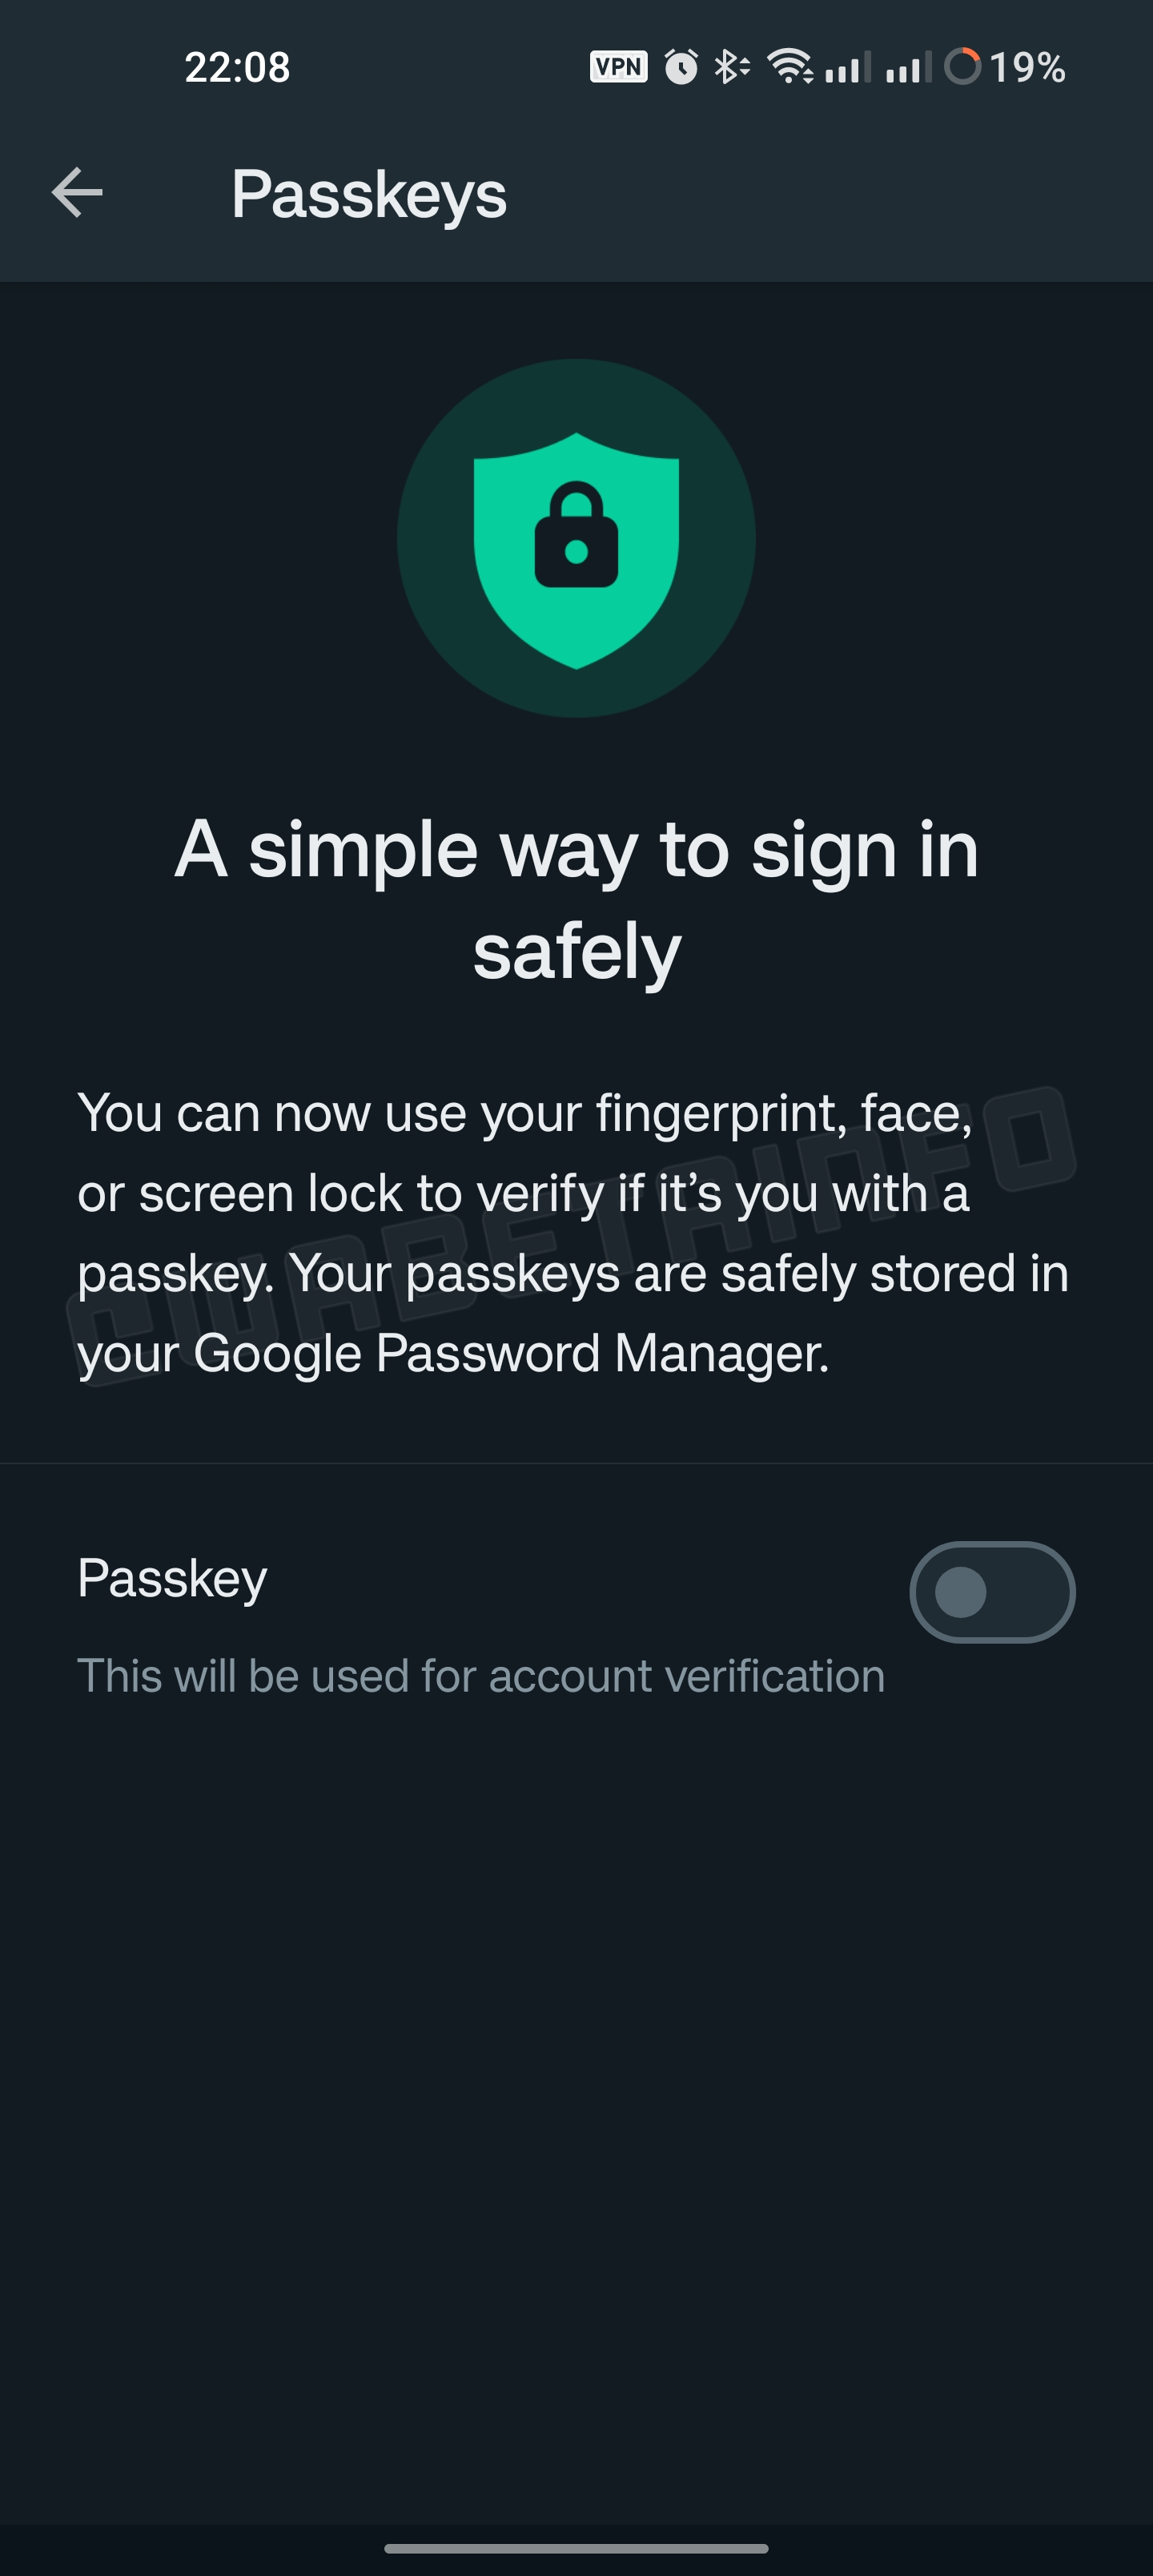 whatsapp-security-passkey-tips